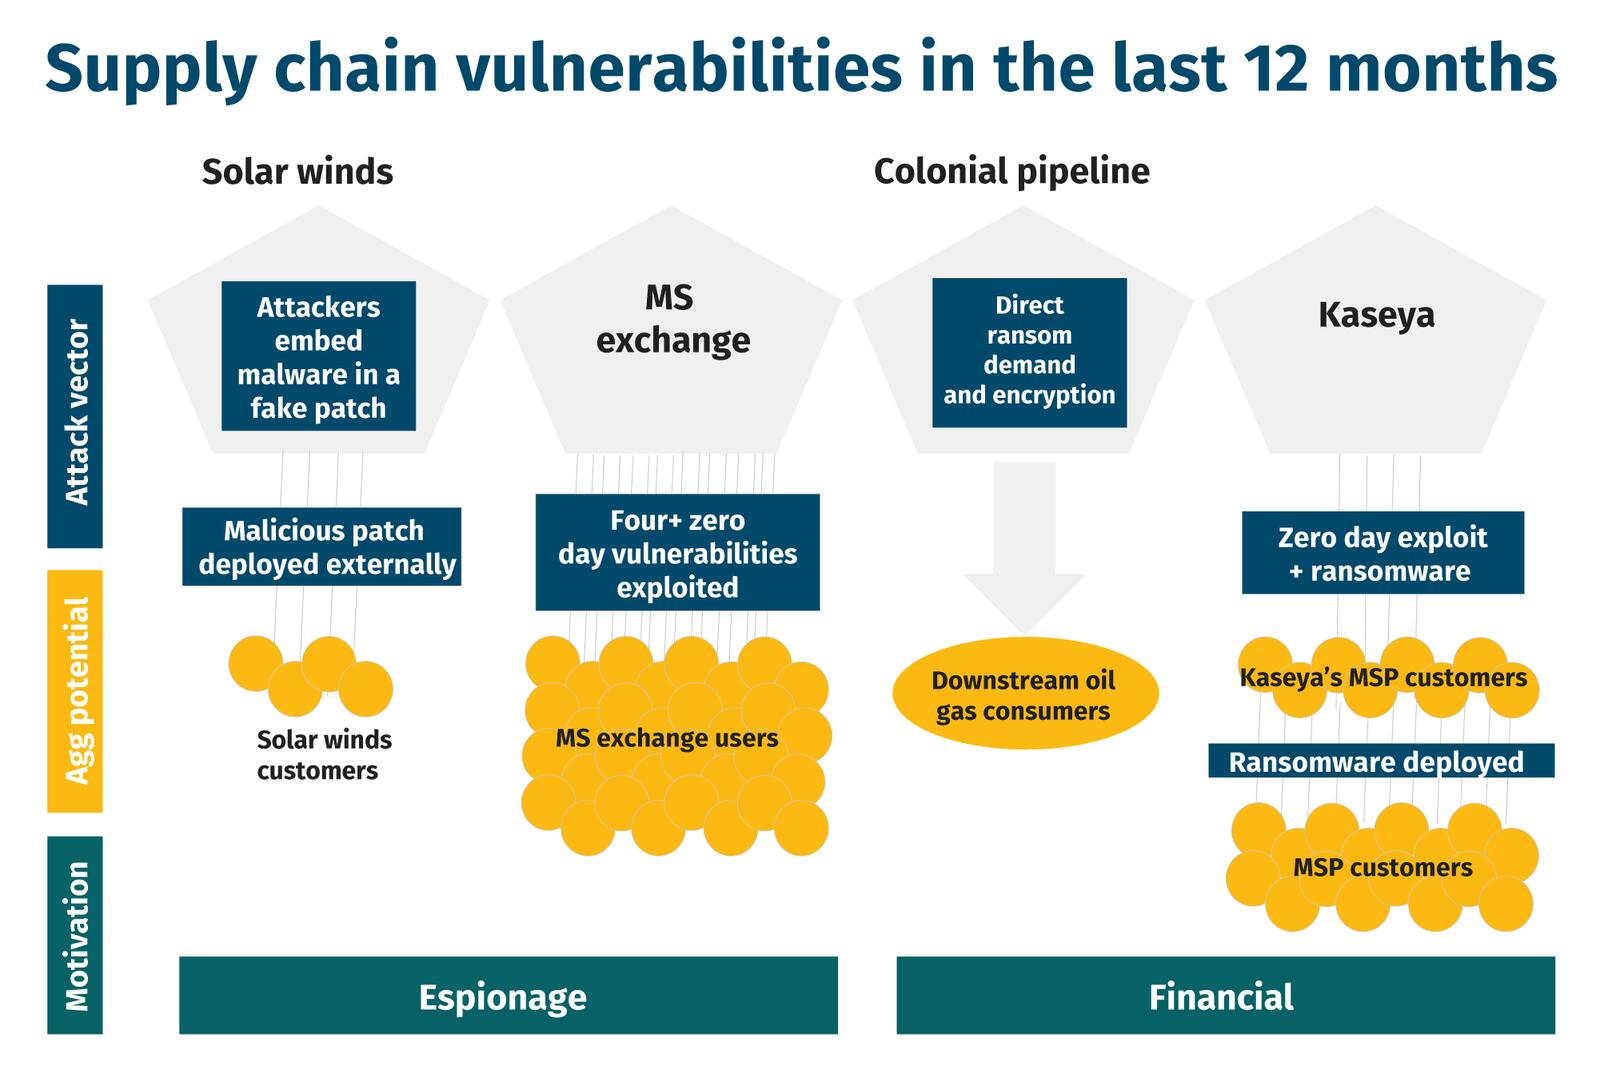 Supply chain vulnerabilities in the last 12 months